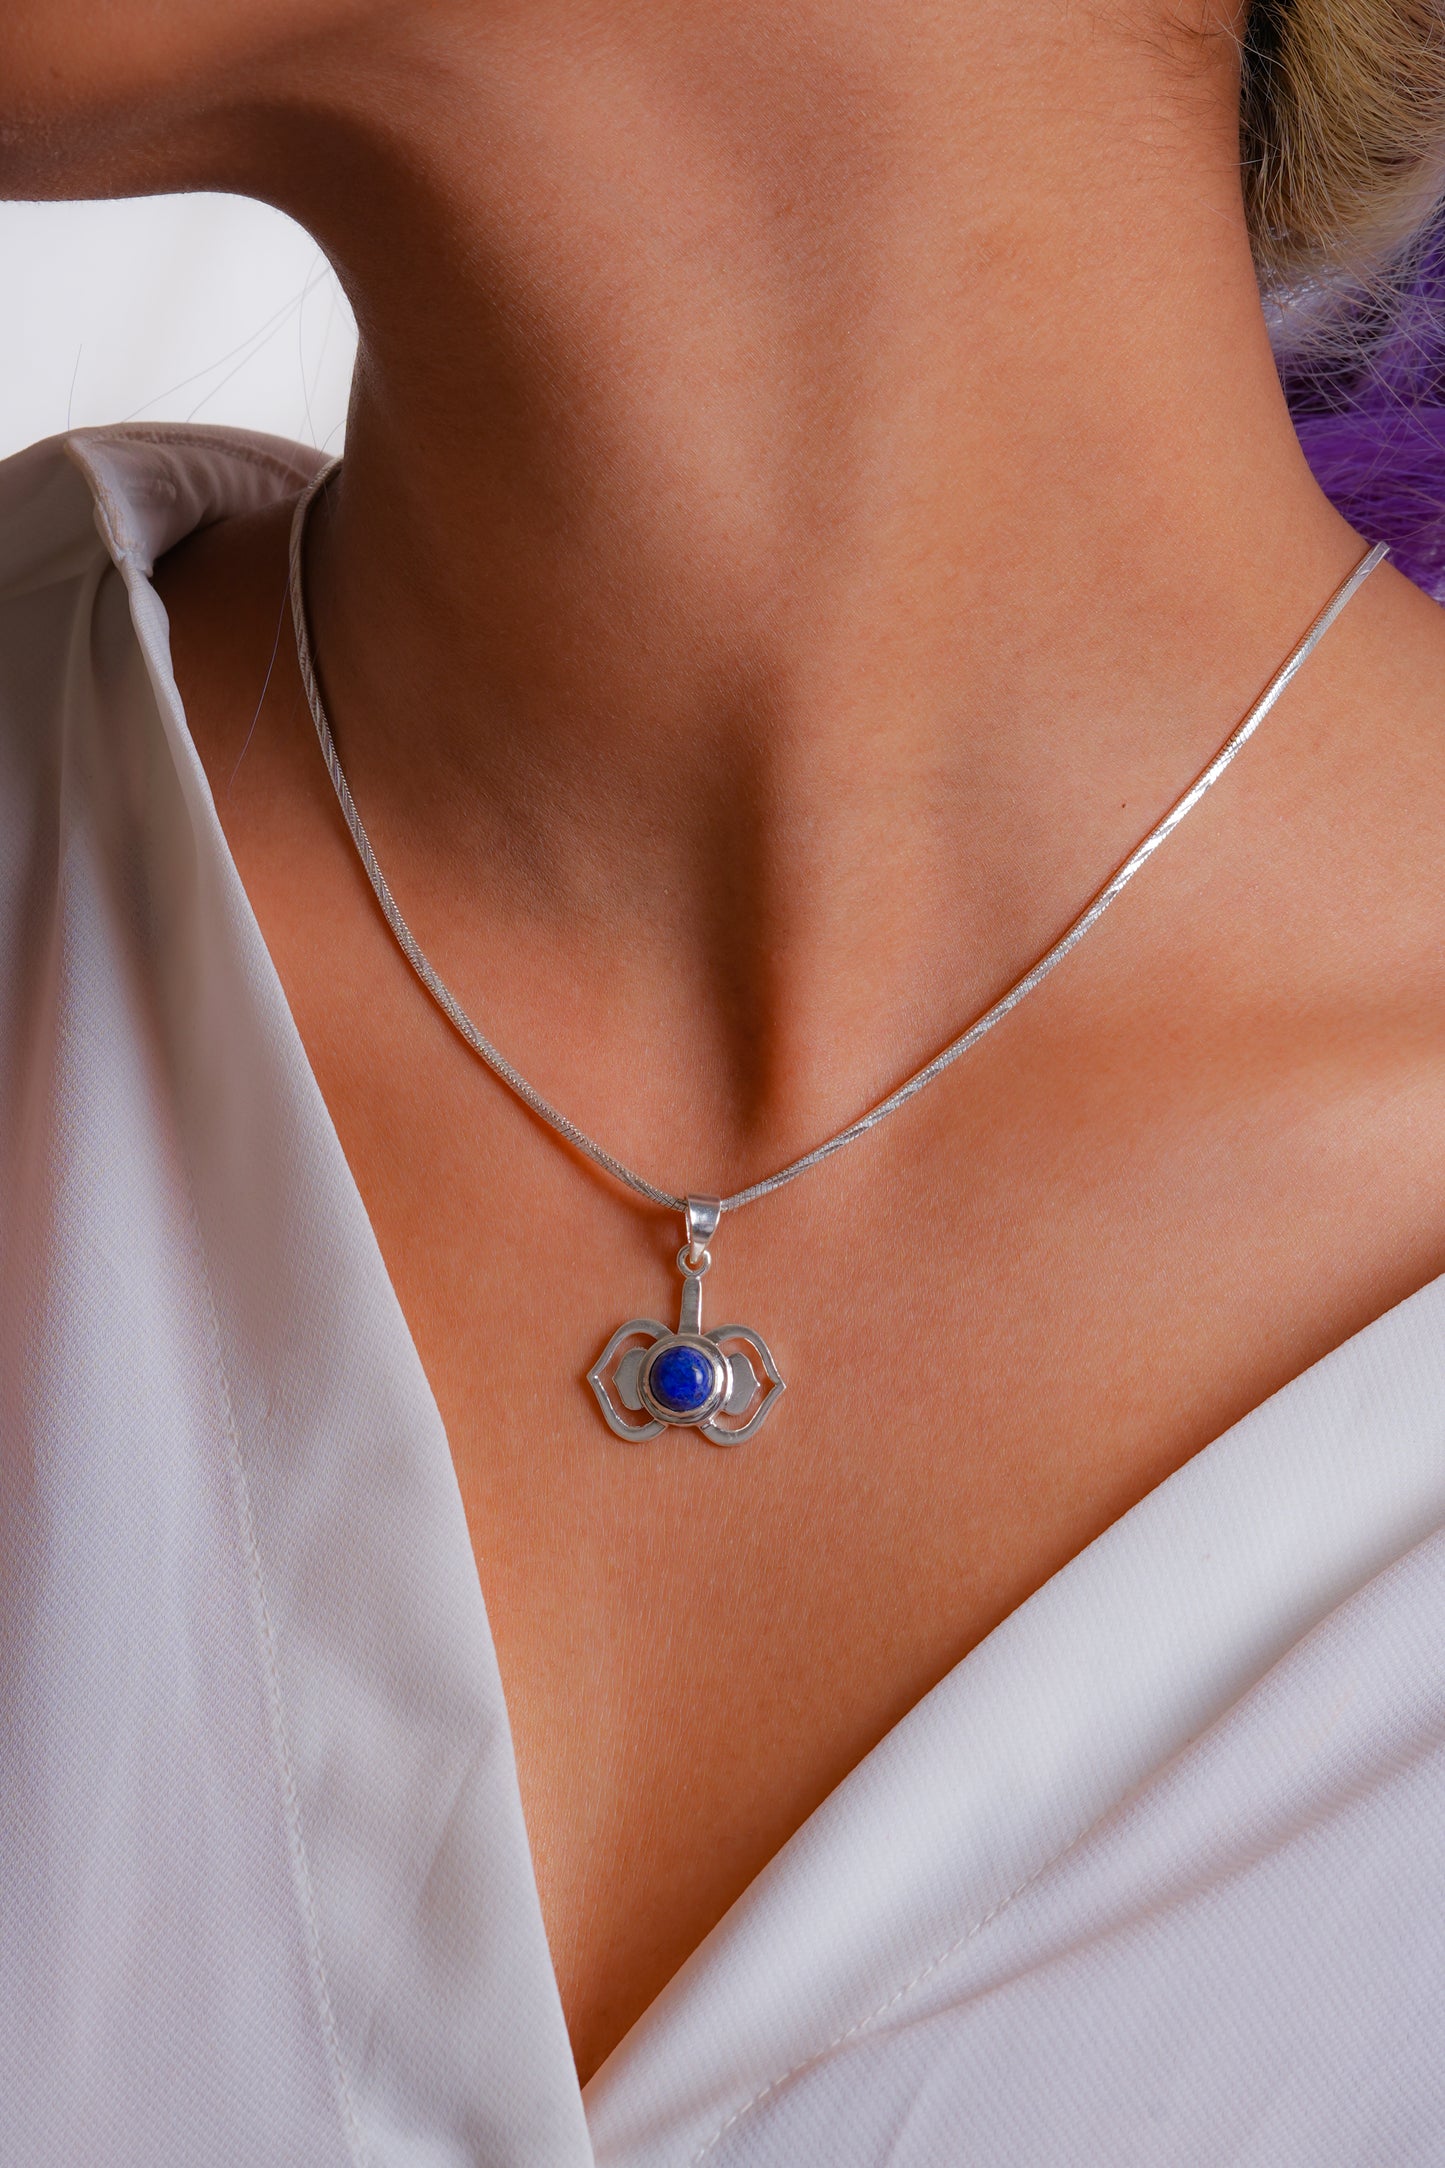 'I See Clearly' Lapis Lazuli Pendant